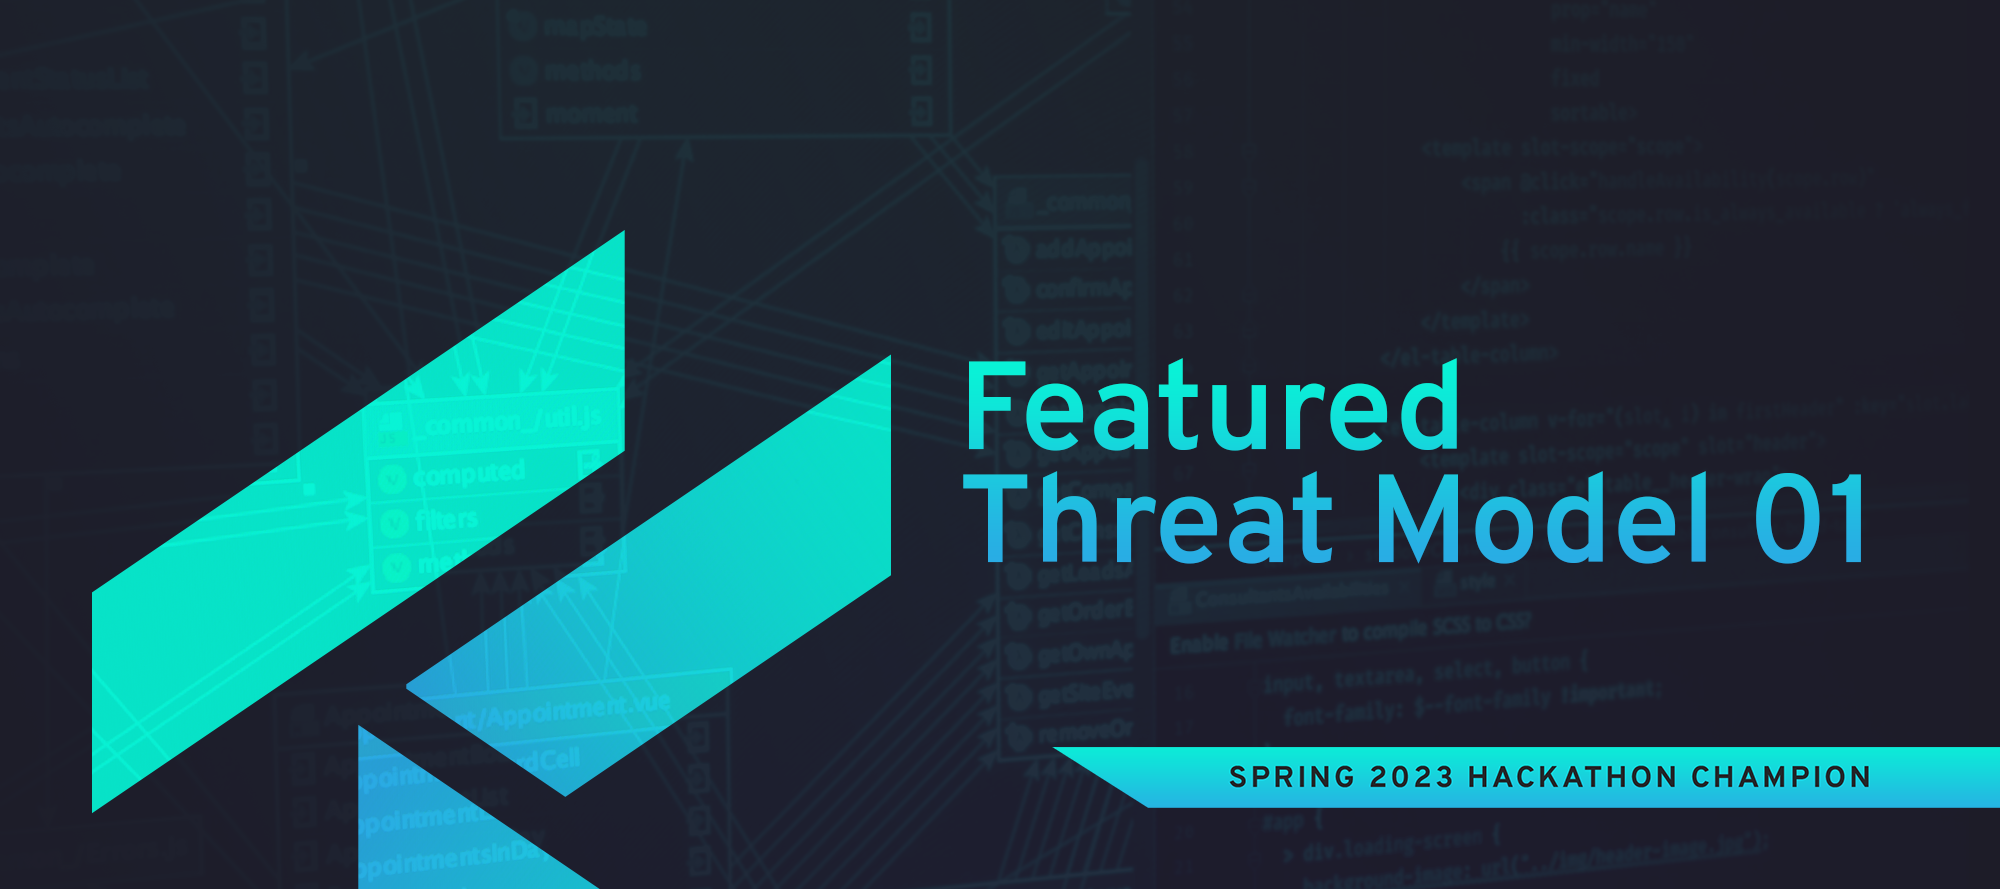 Featured Threat Model 01